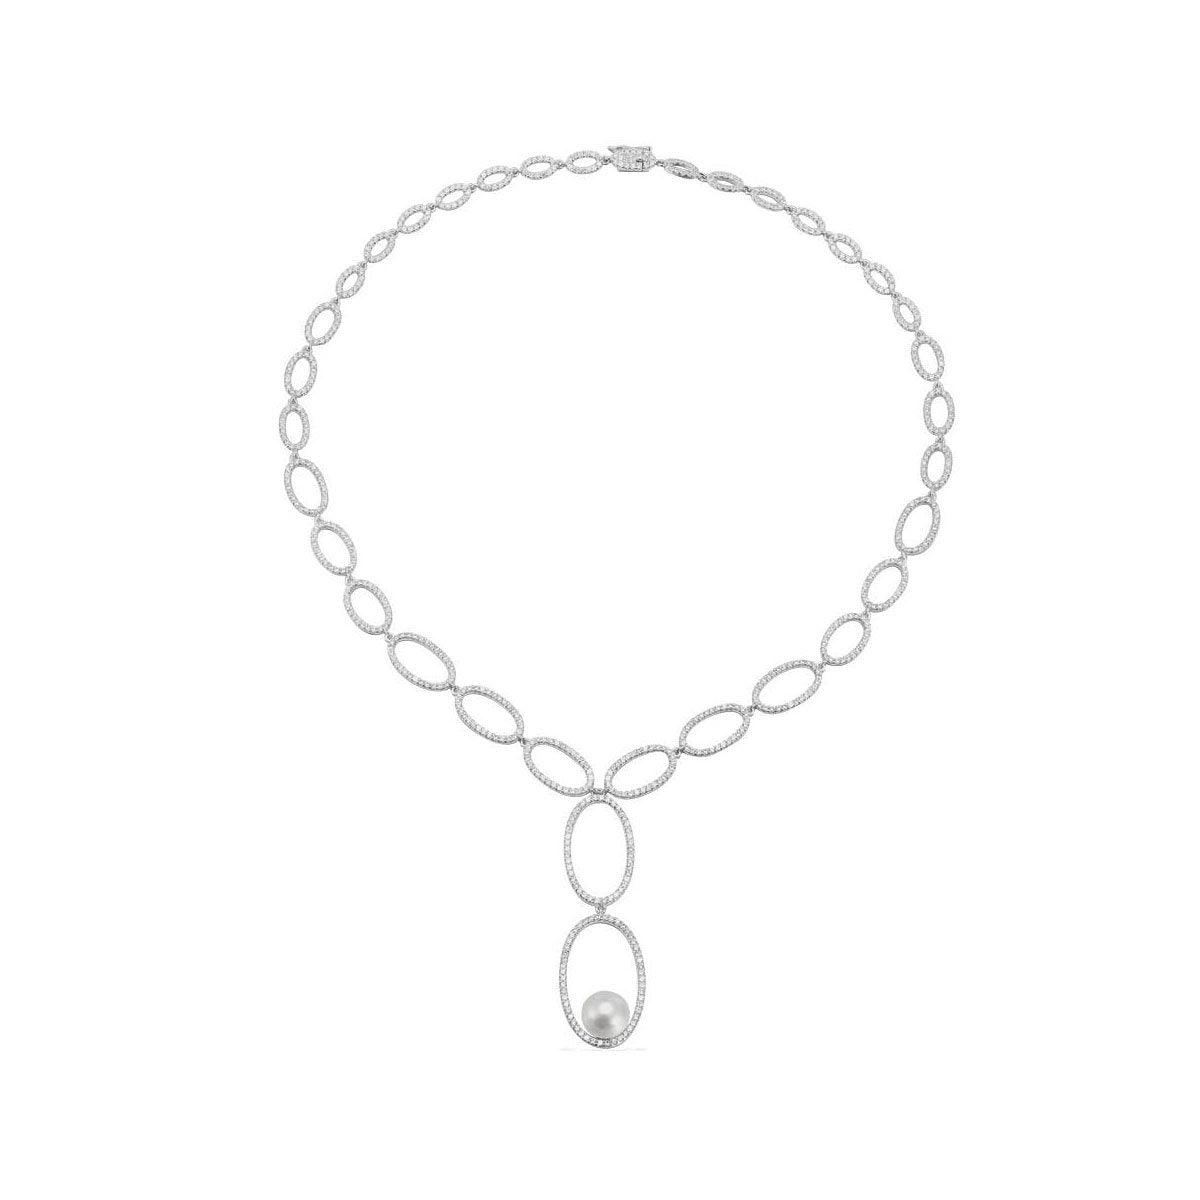 Necklace N1324 - 925 Sterling Silver - Asfour Crystal